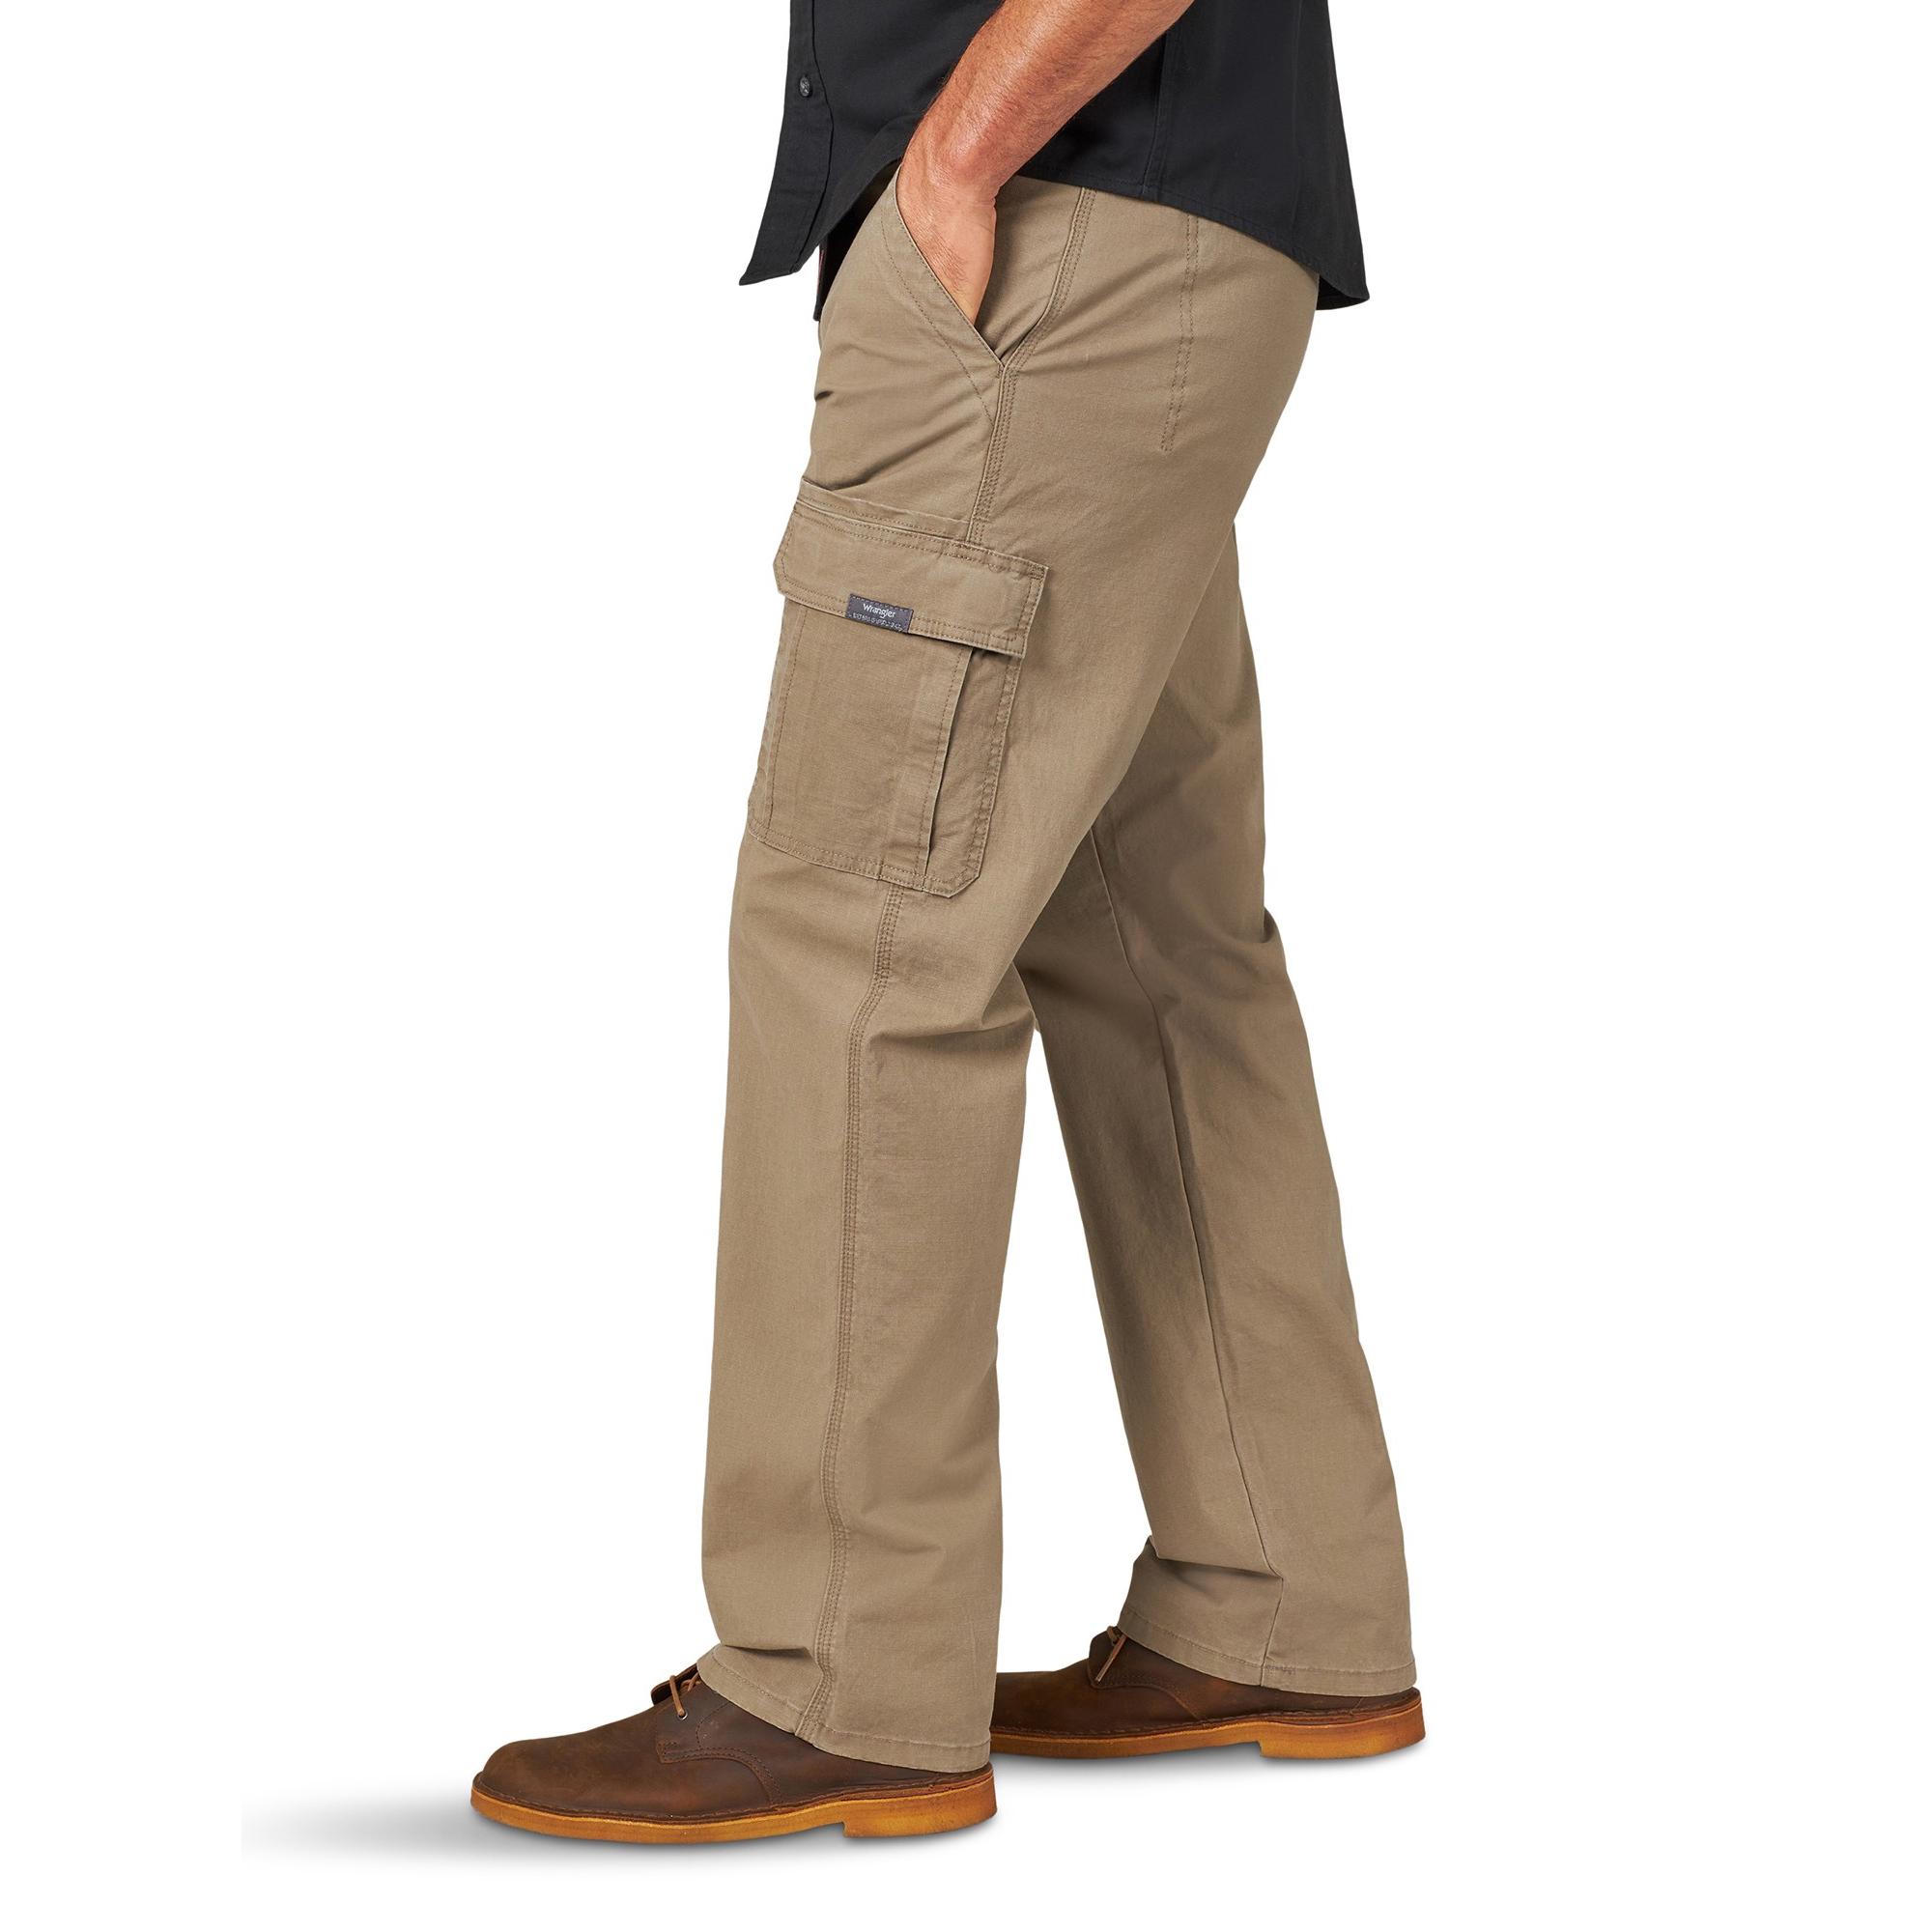 Wrangler Men's and Big Men's Relaxed Fit Cargo Pants With Stretch - image 4 of 7